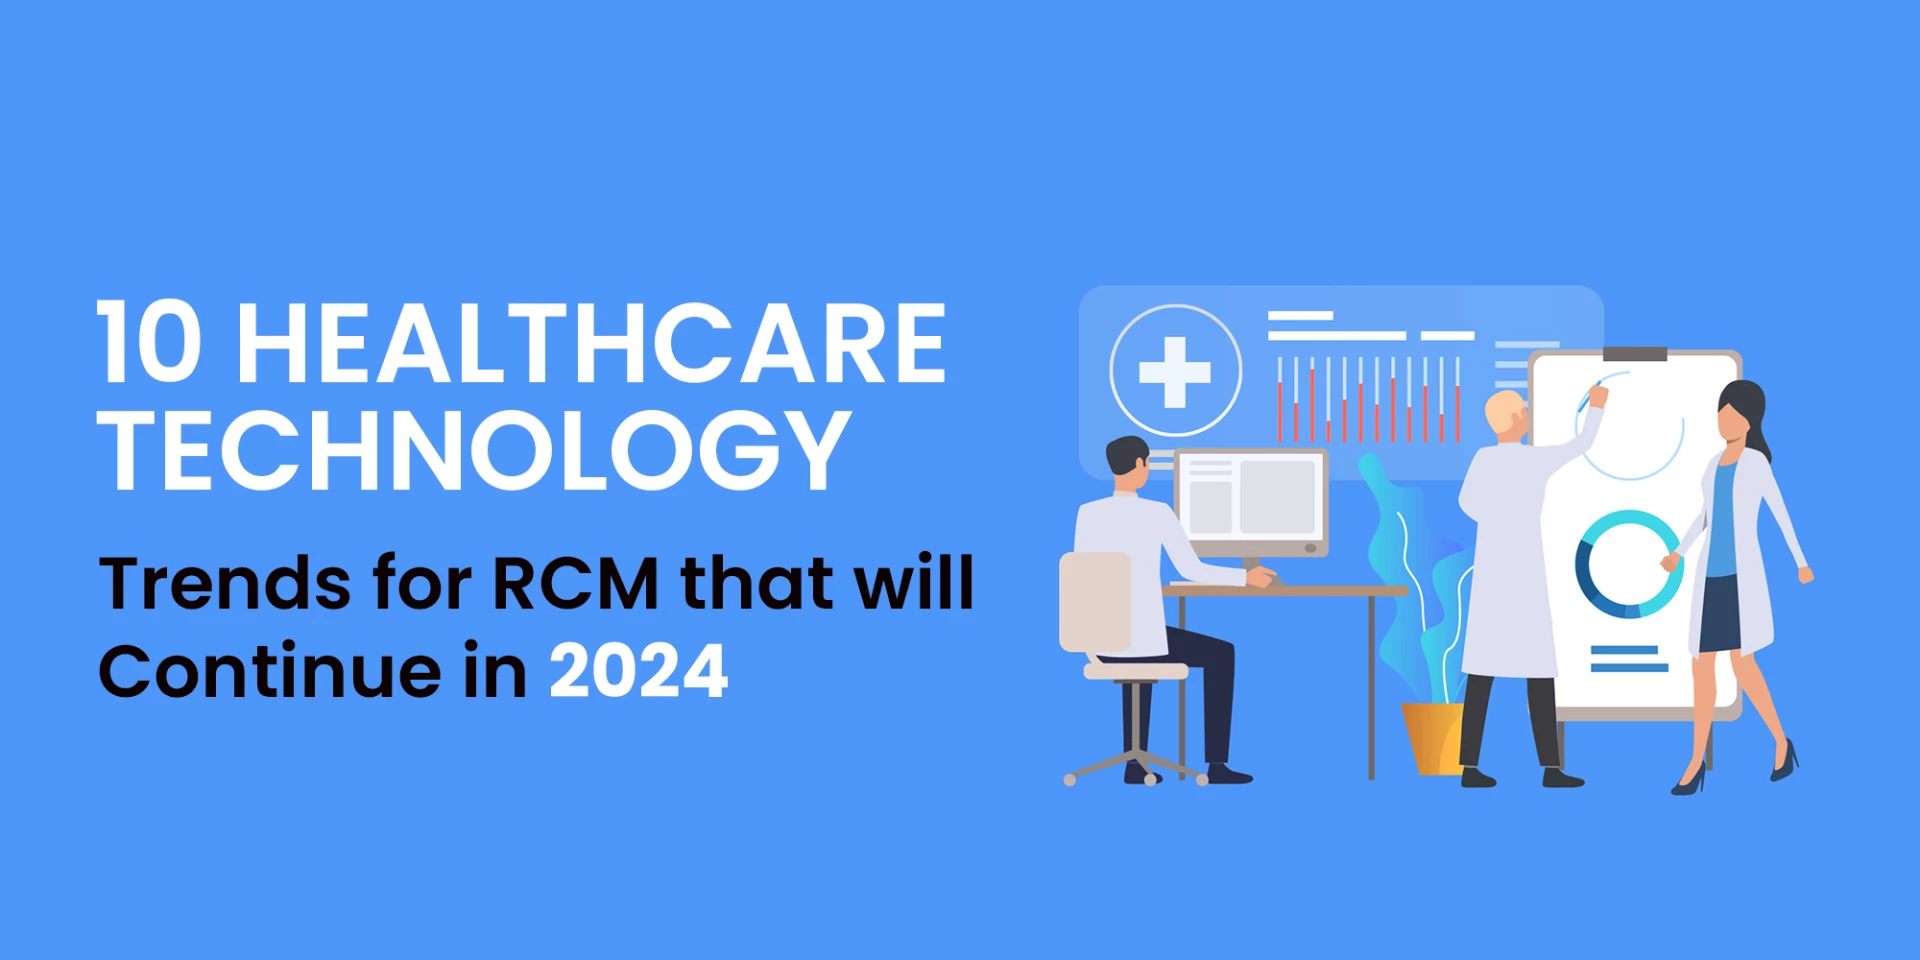 10 Healthcare Technology Trends for RCM that will Continue in 2024